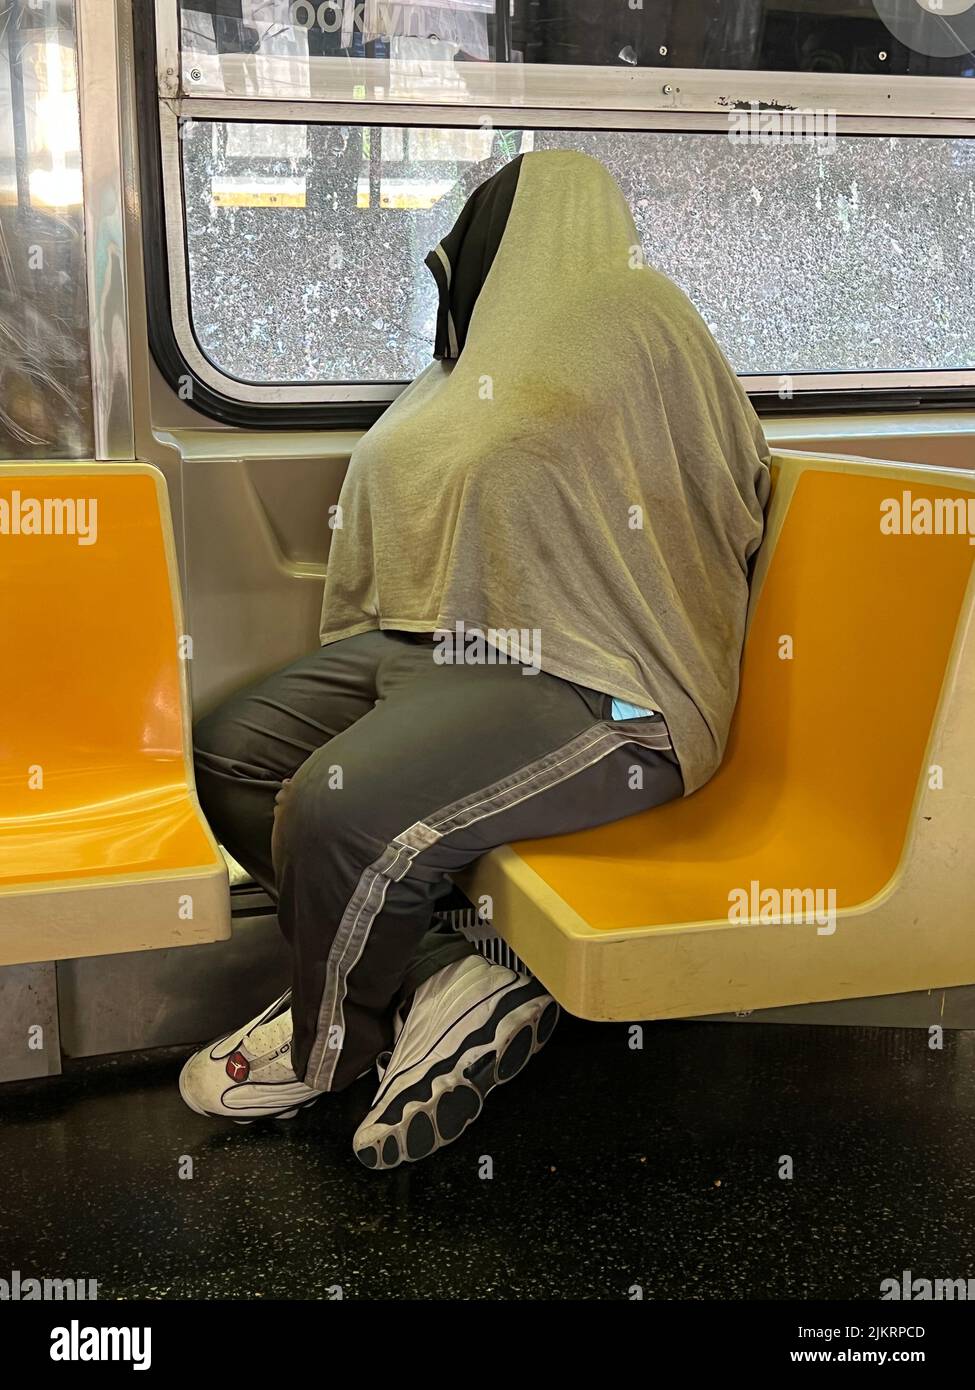 Homeless man retreated into his own world riding a New York City subway train in Brooklyn. Stock Photo